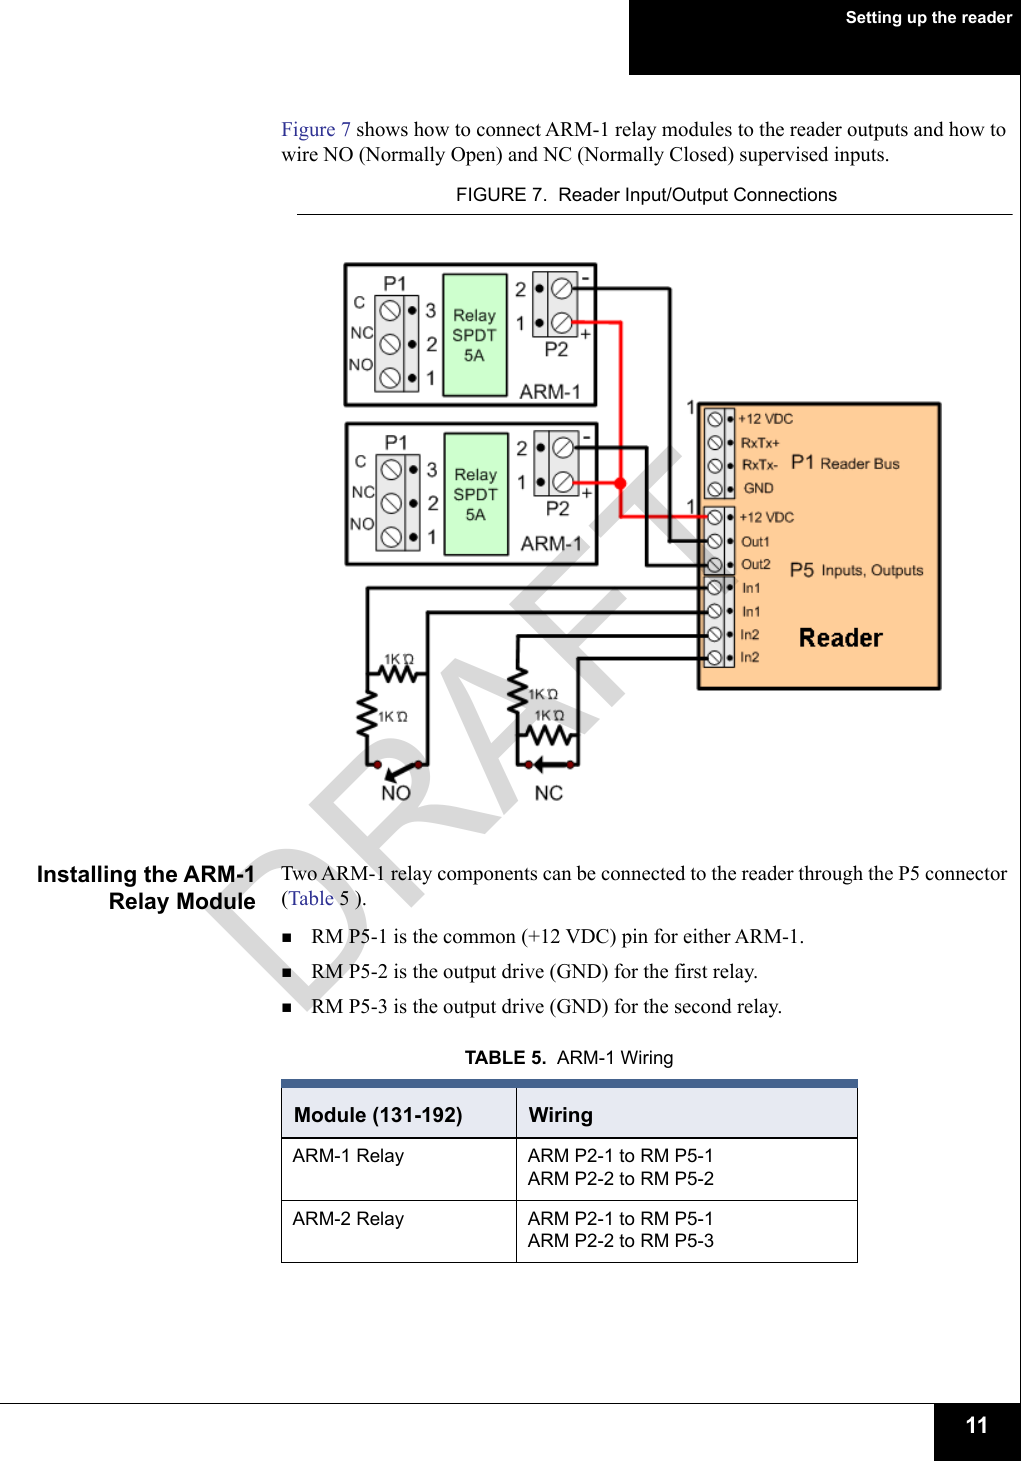 Setting up the reader11Figure 7 shows how to connect ARM-1 relay modules to the reader outputs and how to wire NO (Normally Open) and NC (Normally Closed) supervised inputs.FIGURE 7.  Reader Input/Output ConnectionsInstalling the ARM-1Relay ModuleTwo ARM-1 relay components can be connected to the reader through the P5 connector (Table 5 ). RM P5-1 is the common (+12 VDC) pin for either ARM-1. RM P5-2 is the output drive (GND) for the first relay. RM P5-3 is the output drive (GND) for the second relay.TABLE 5.  ARM-1 WiringModule (131-192) WiringARM-1 Relay ARM P2-1 to RM P5-1ARM P2-2 to RM P5-2ARM-2 Relay ARM P2-1 to RM P5-1ARM P2-2 to RM P5-3DRAFT